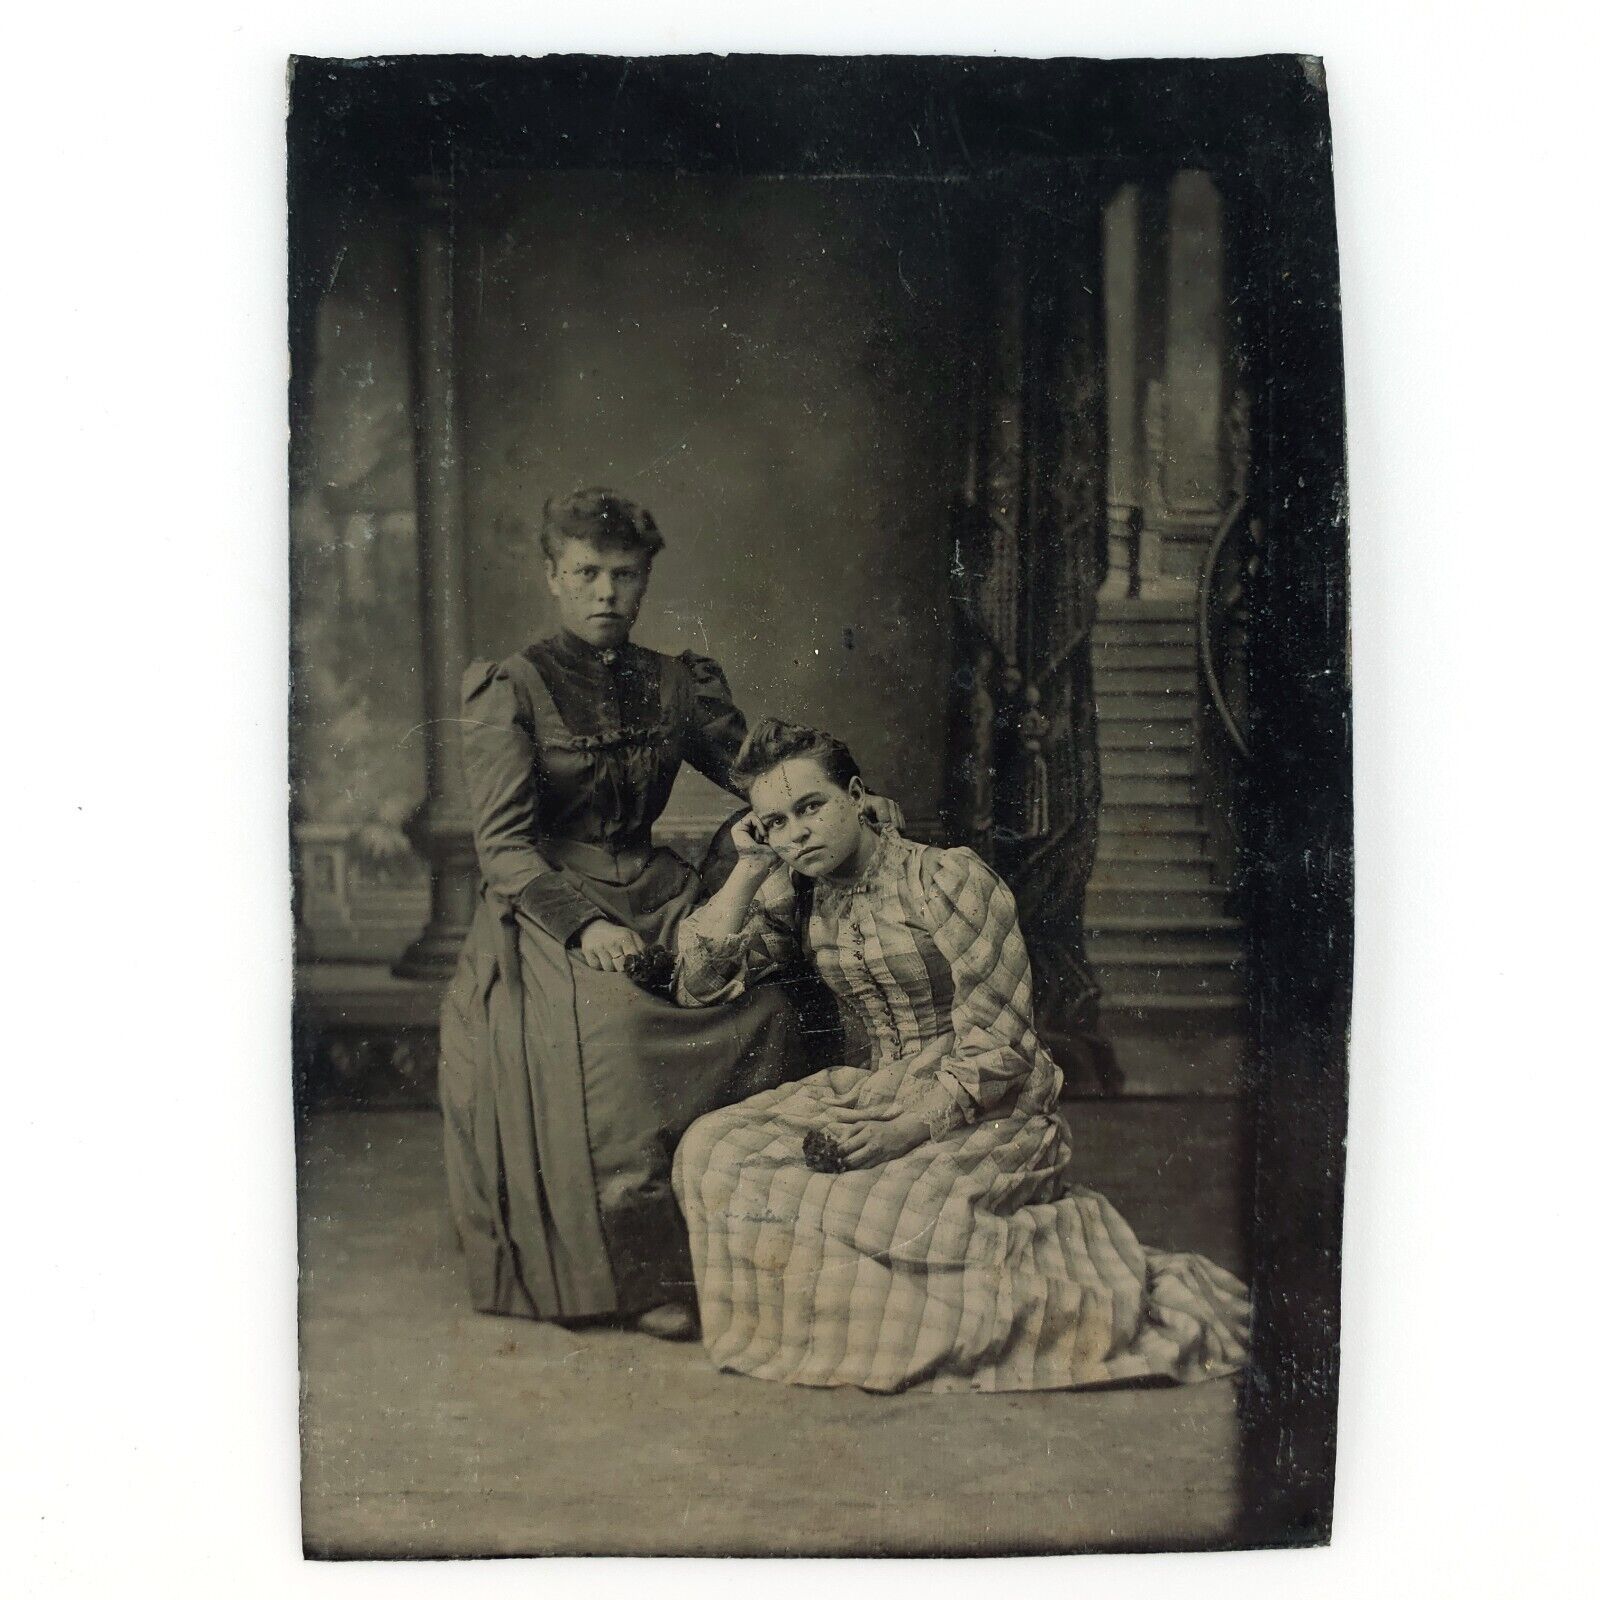 Affectionate Girls Holding Flowers Tintype c1870 Antique 1/6 Plate Photo A3376